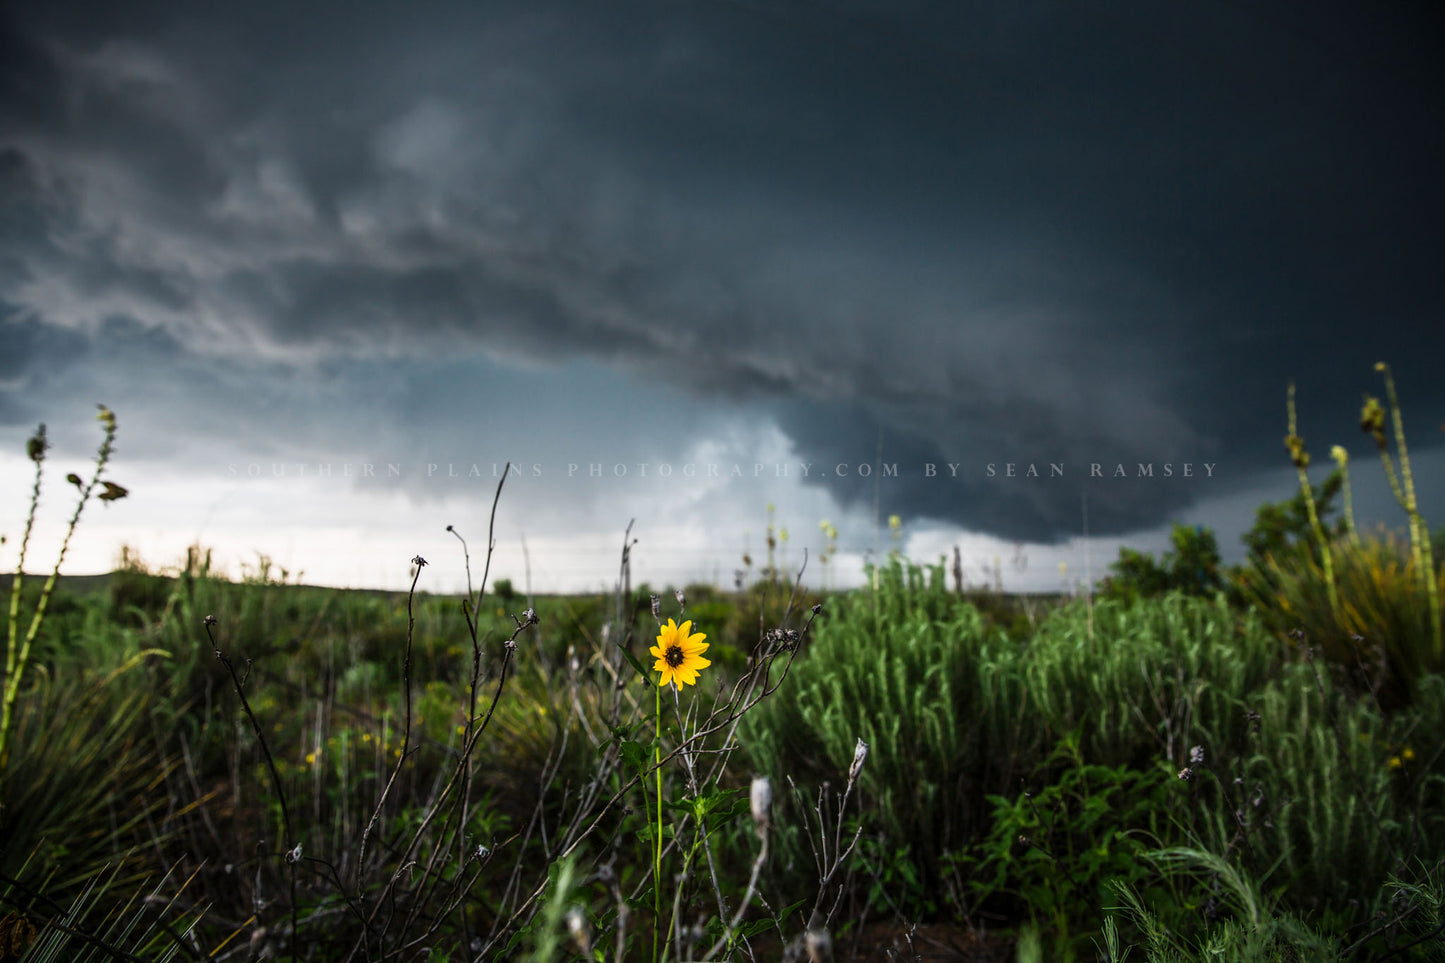 Storm photography print of a wild sunflower standing tall as an intense thunderstorm passes behind on a stormy spring day in the Texas panhandle by Sean Ramsey of Southern Plains Photography.